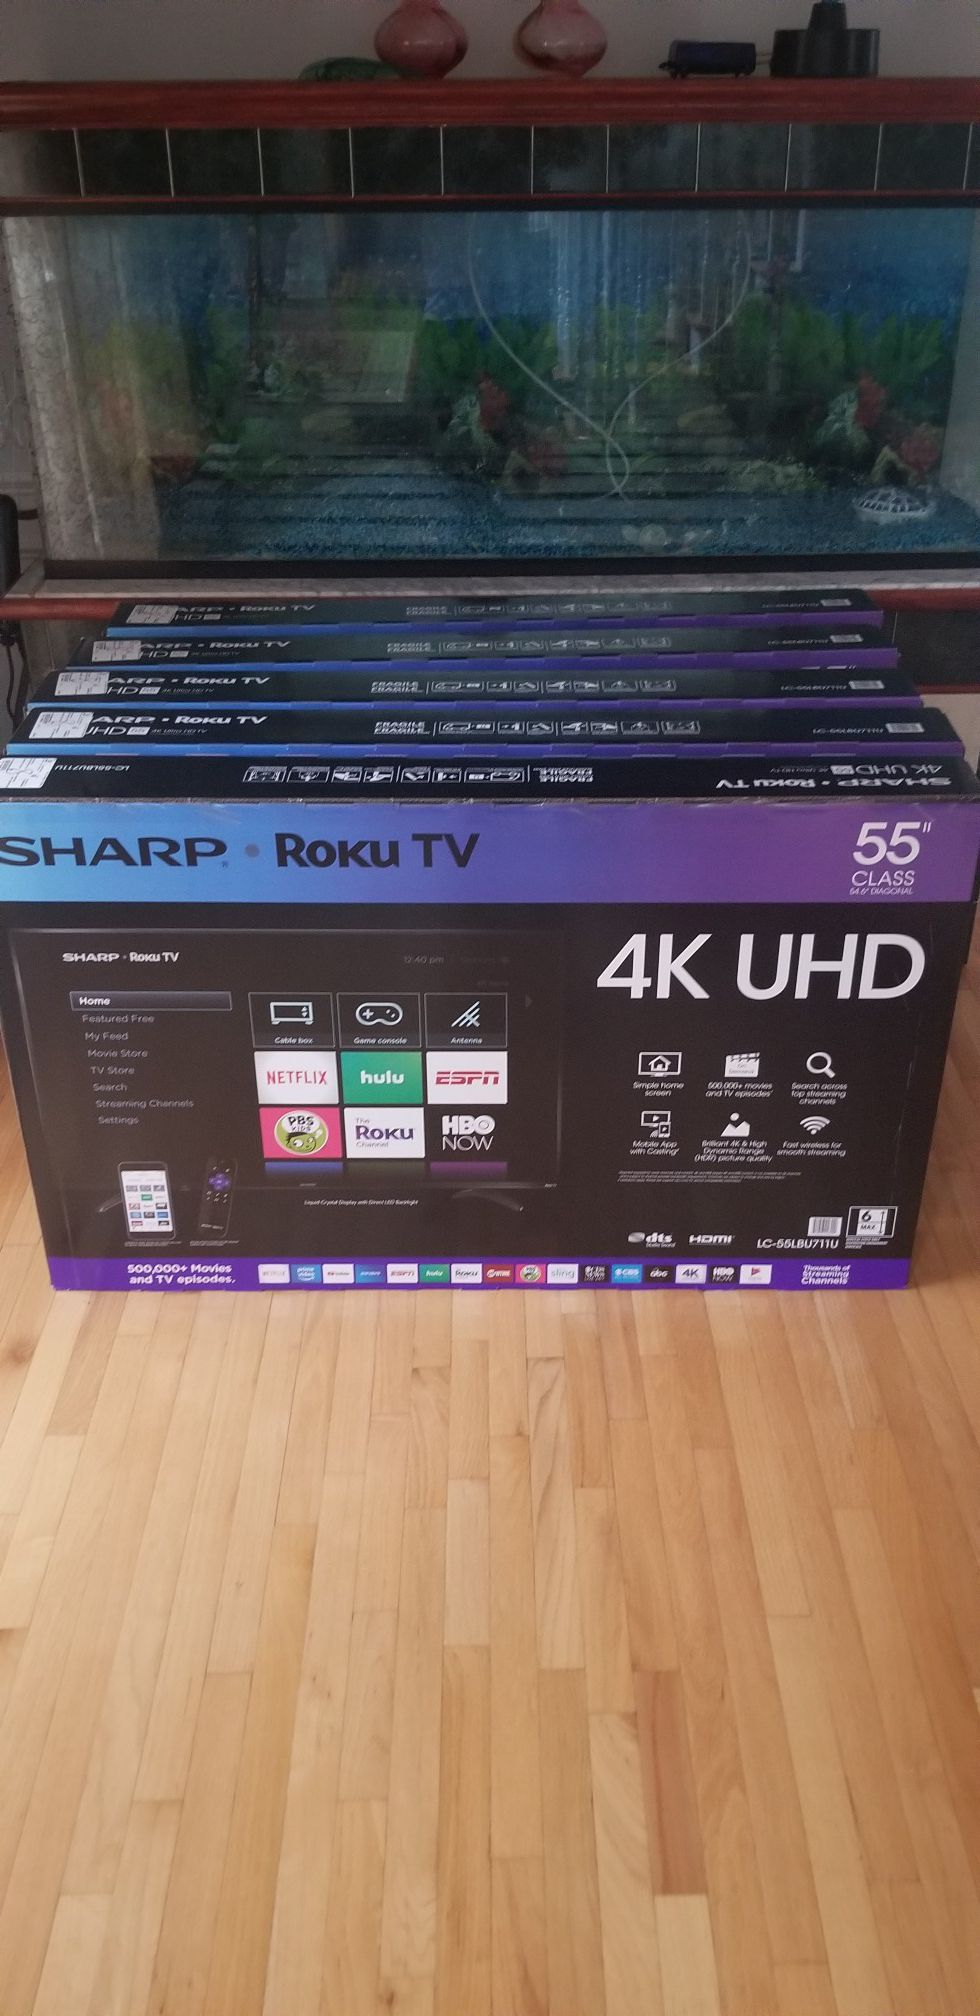 BRAND NEW SEALED- 55"- SMART- 4K UHD TV with HDR- ROKU TV- 2160P